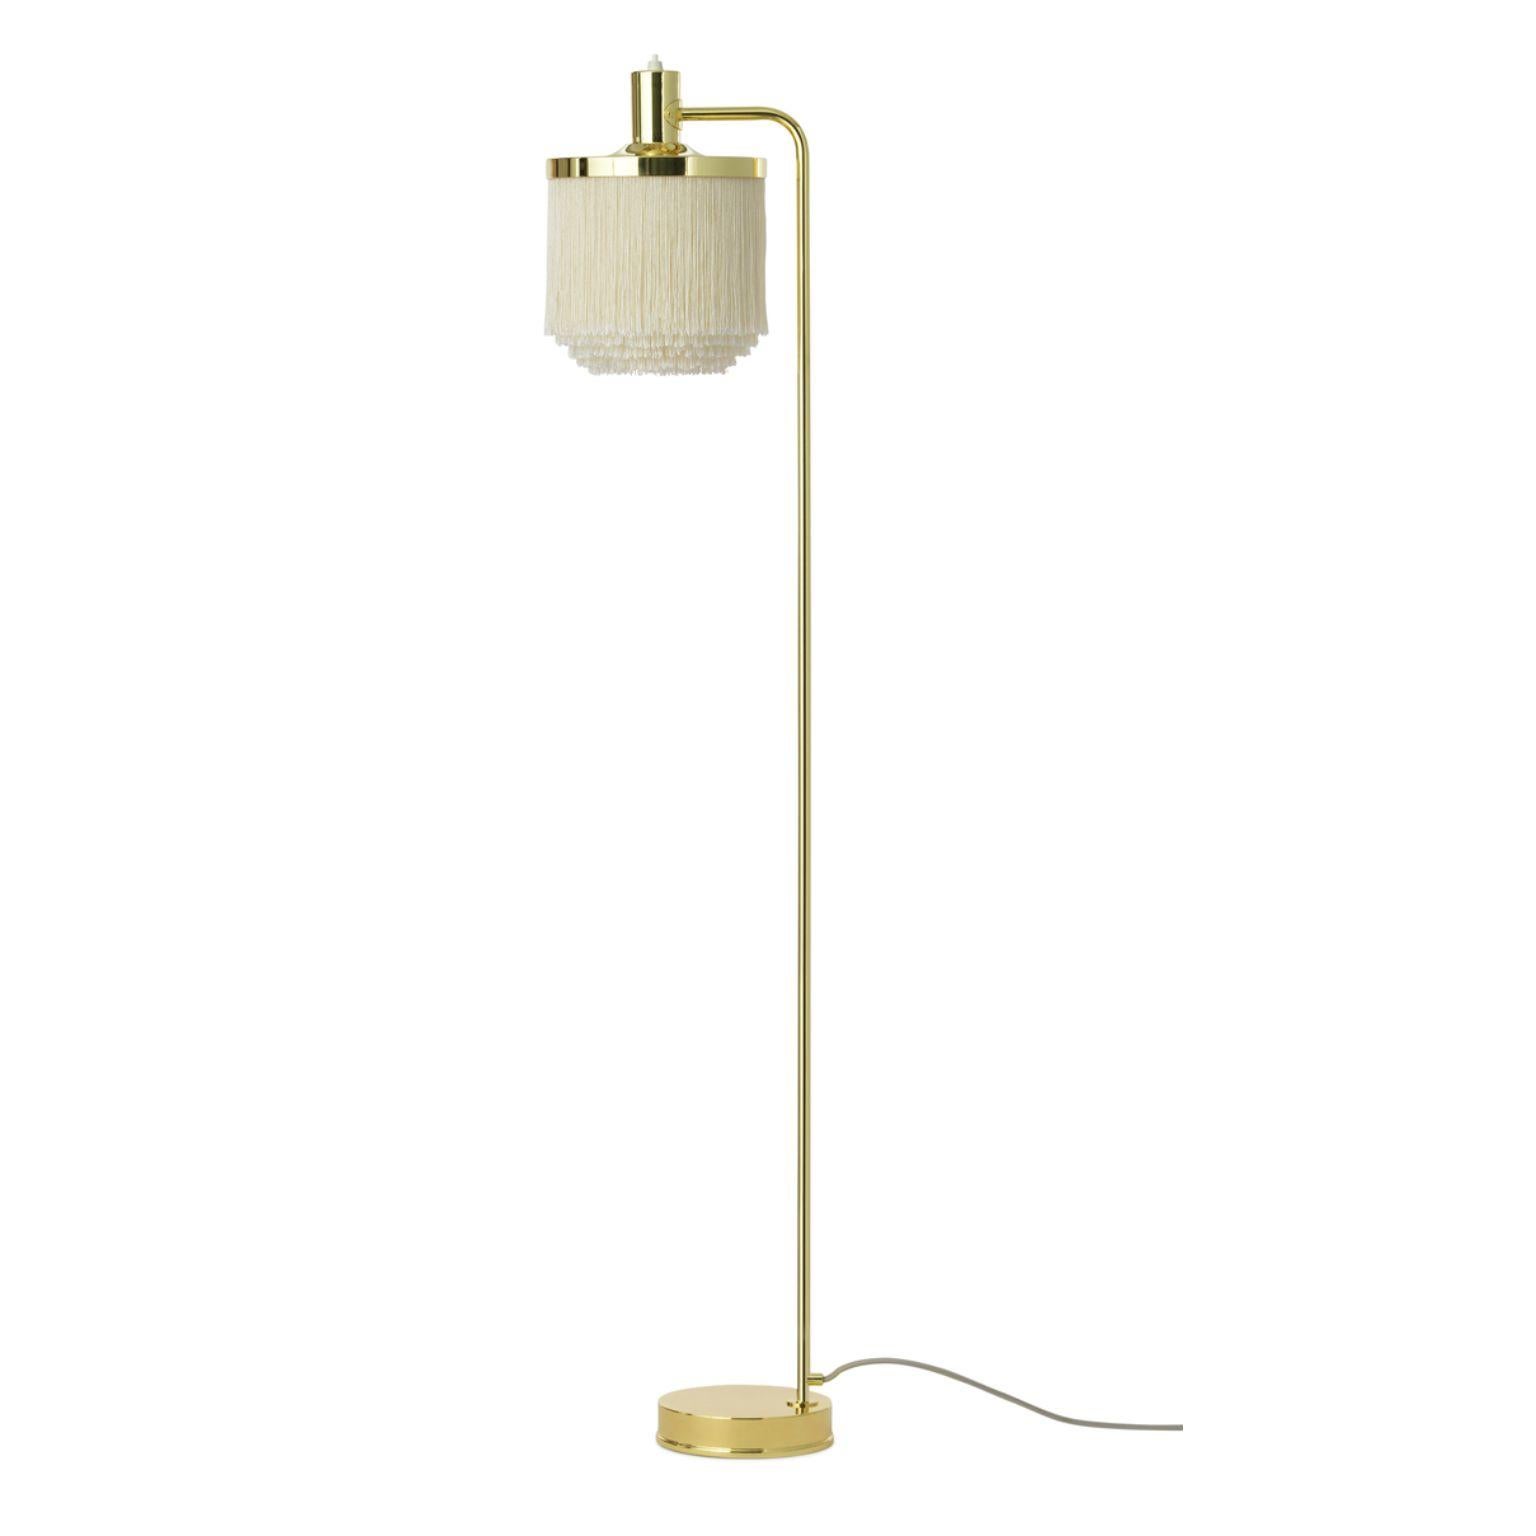 Fringe Cream White Floor Lamp by Warm Nordic
Dimensions: D20 x W26 x H126 cm
Material: Brass plated steel, Viscose fringes
Weight: 1 kg
Also available in different colours. Please contact us.

An iconic floor lamp with sophisticated fringes,